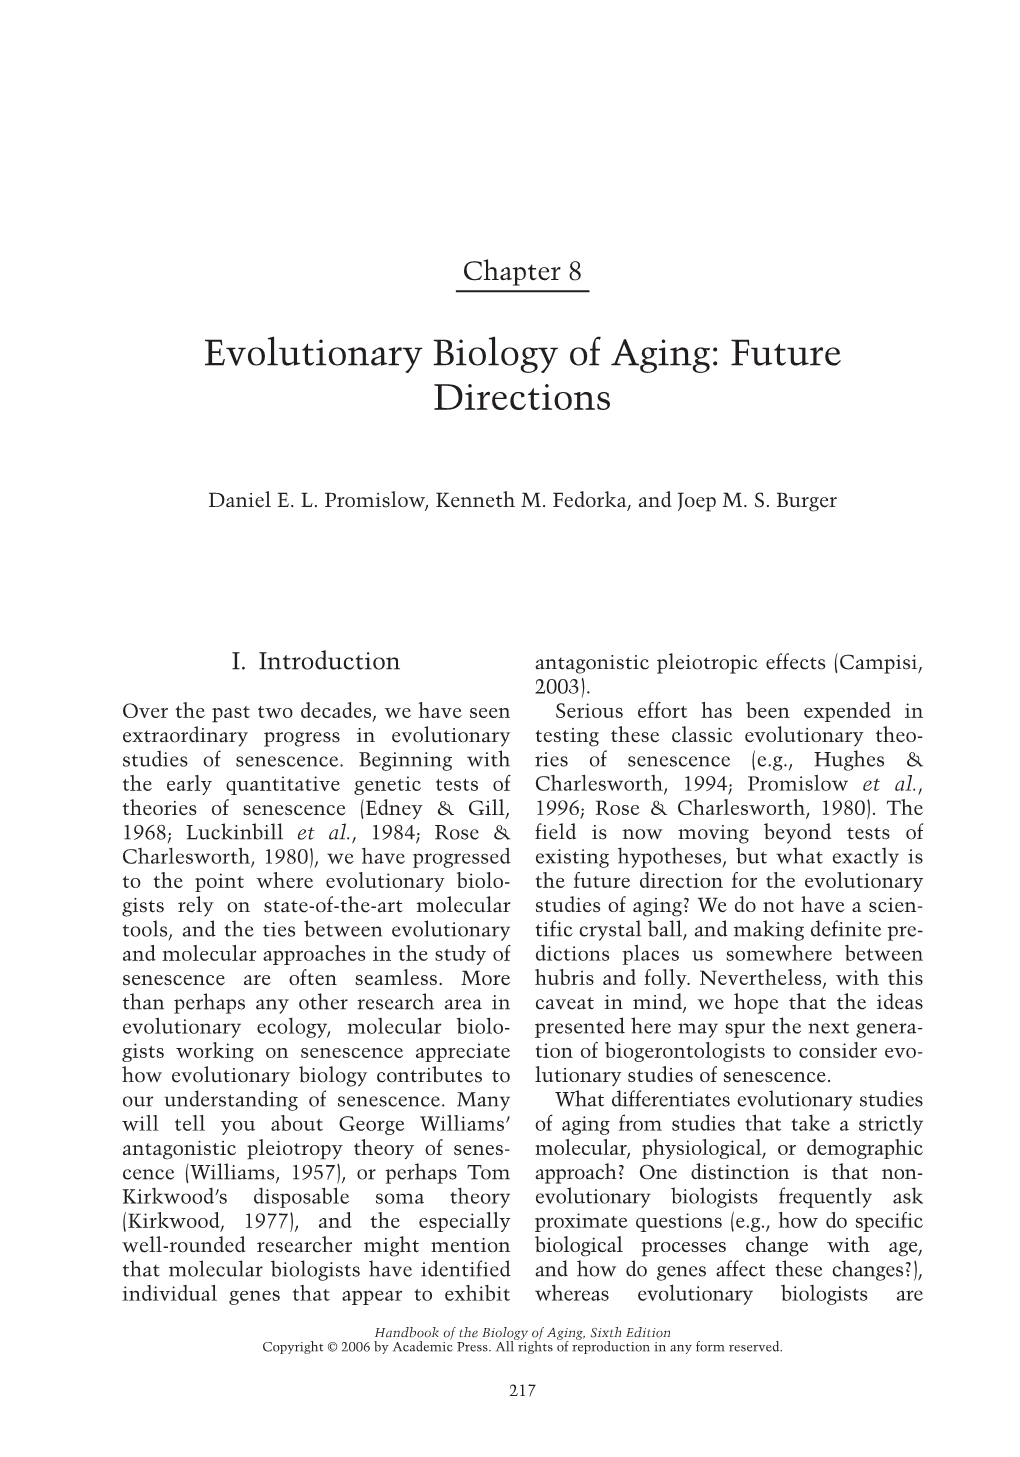 Evolutionary Biology of Aging: Future Directions